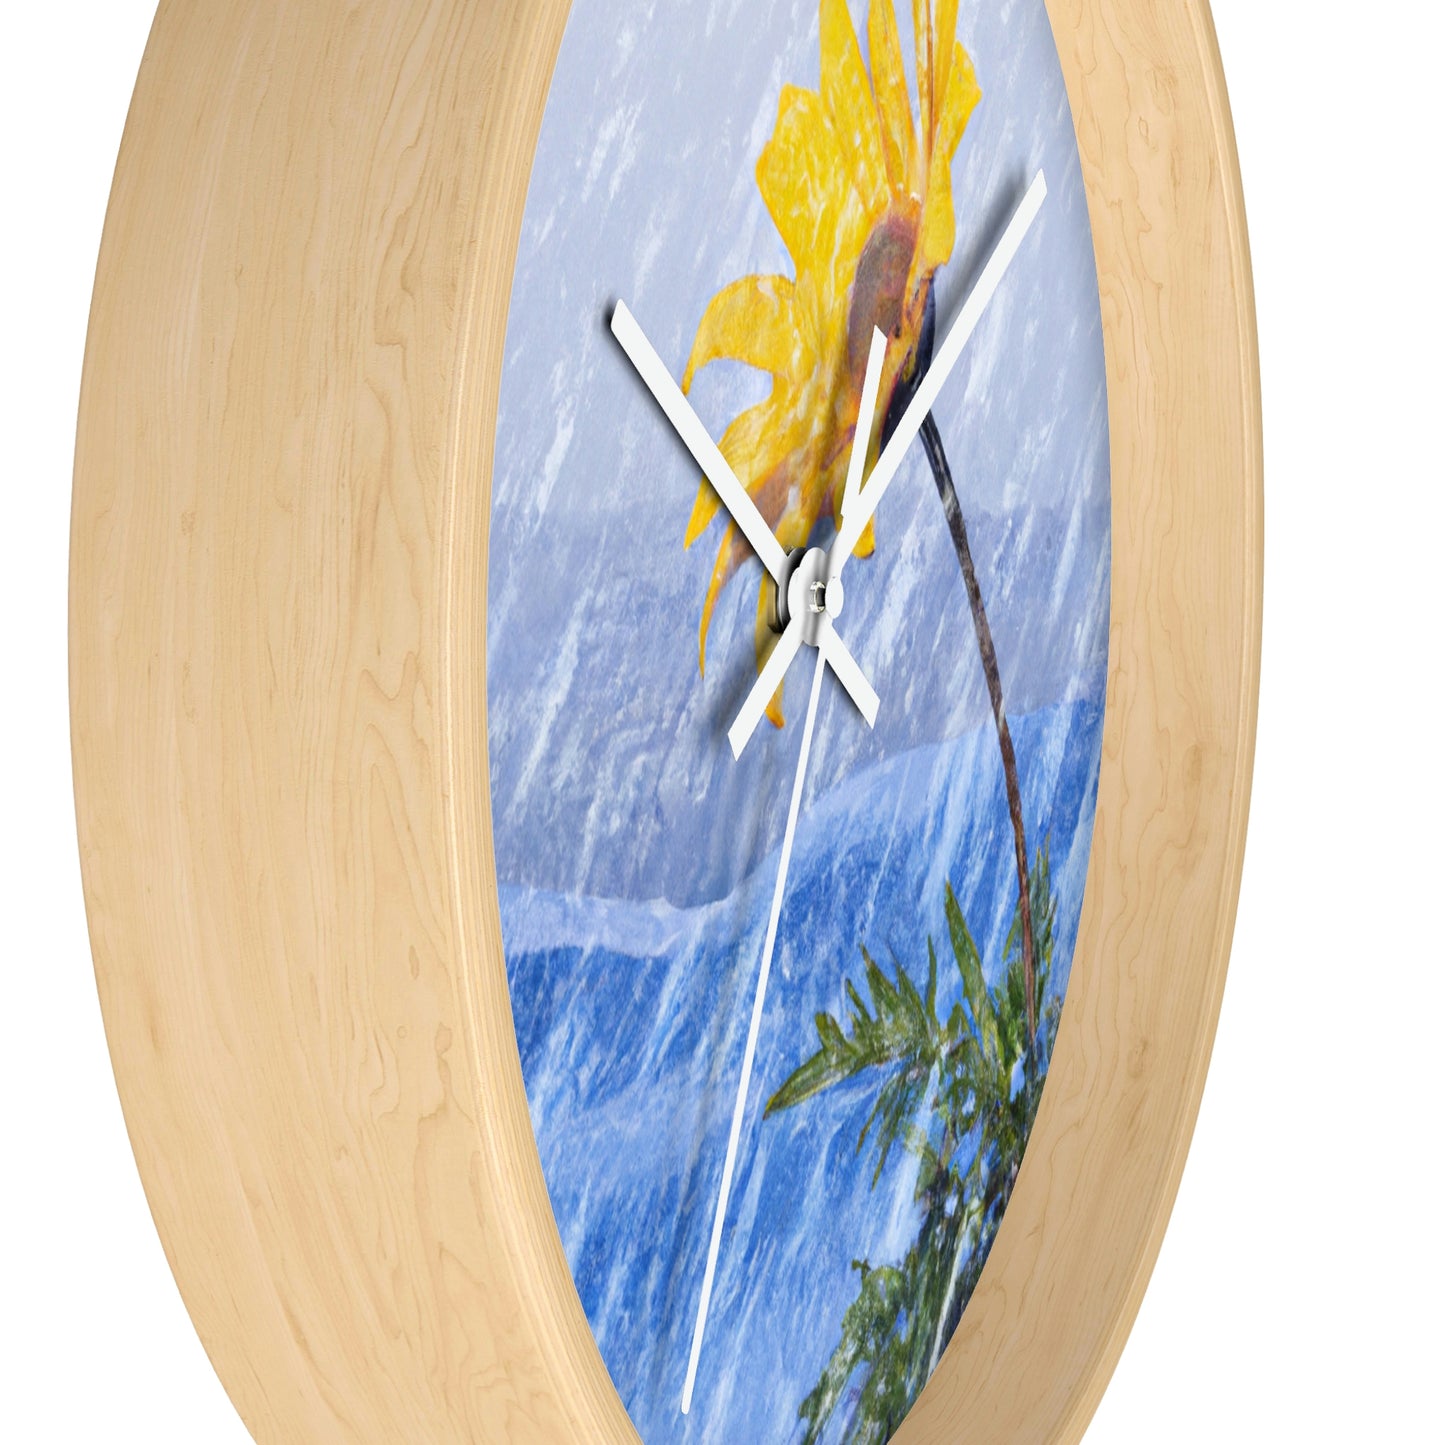 "A Burst of Color in the Glistening White: The Miracle of a Flower Blooms in a Snowstorm" - The Alien Wall Clock